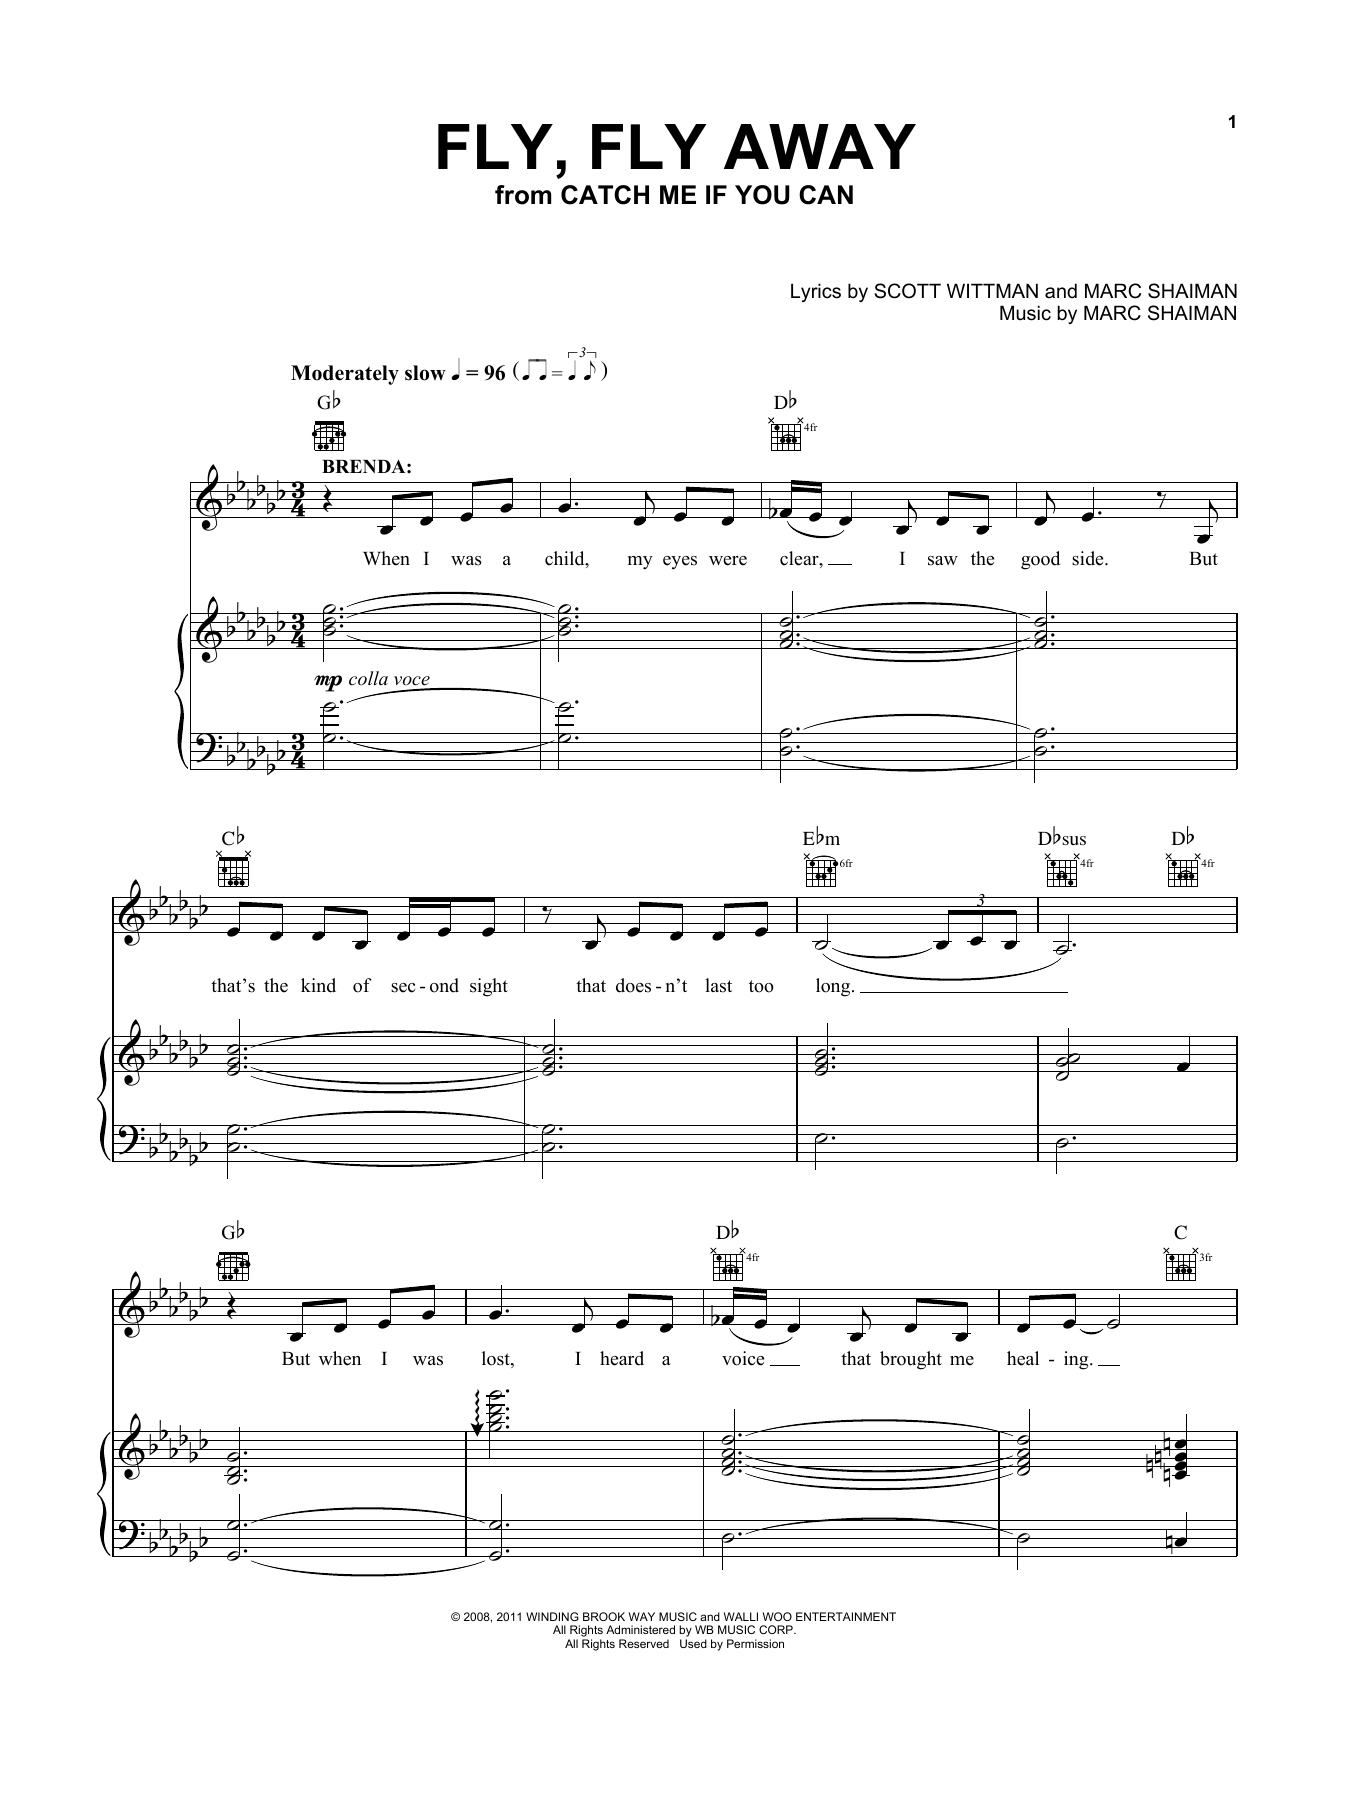 Download Kerry Butler Fly, Fly Away (from Catch Me If You Can Sheet Music